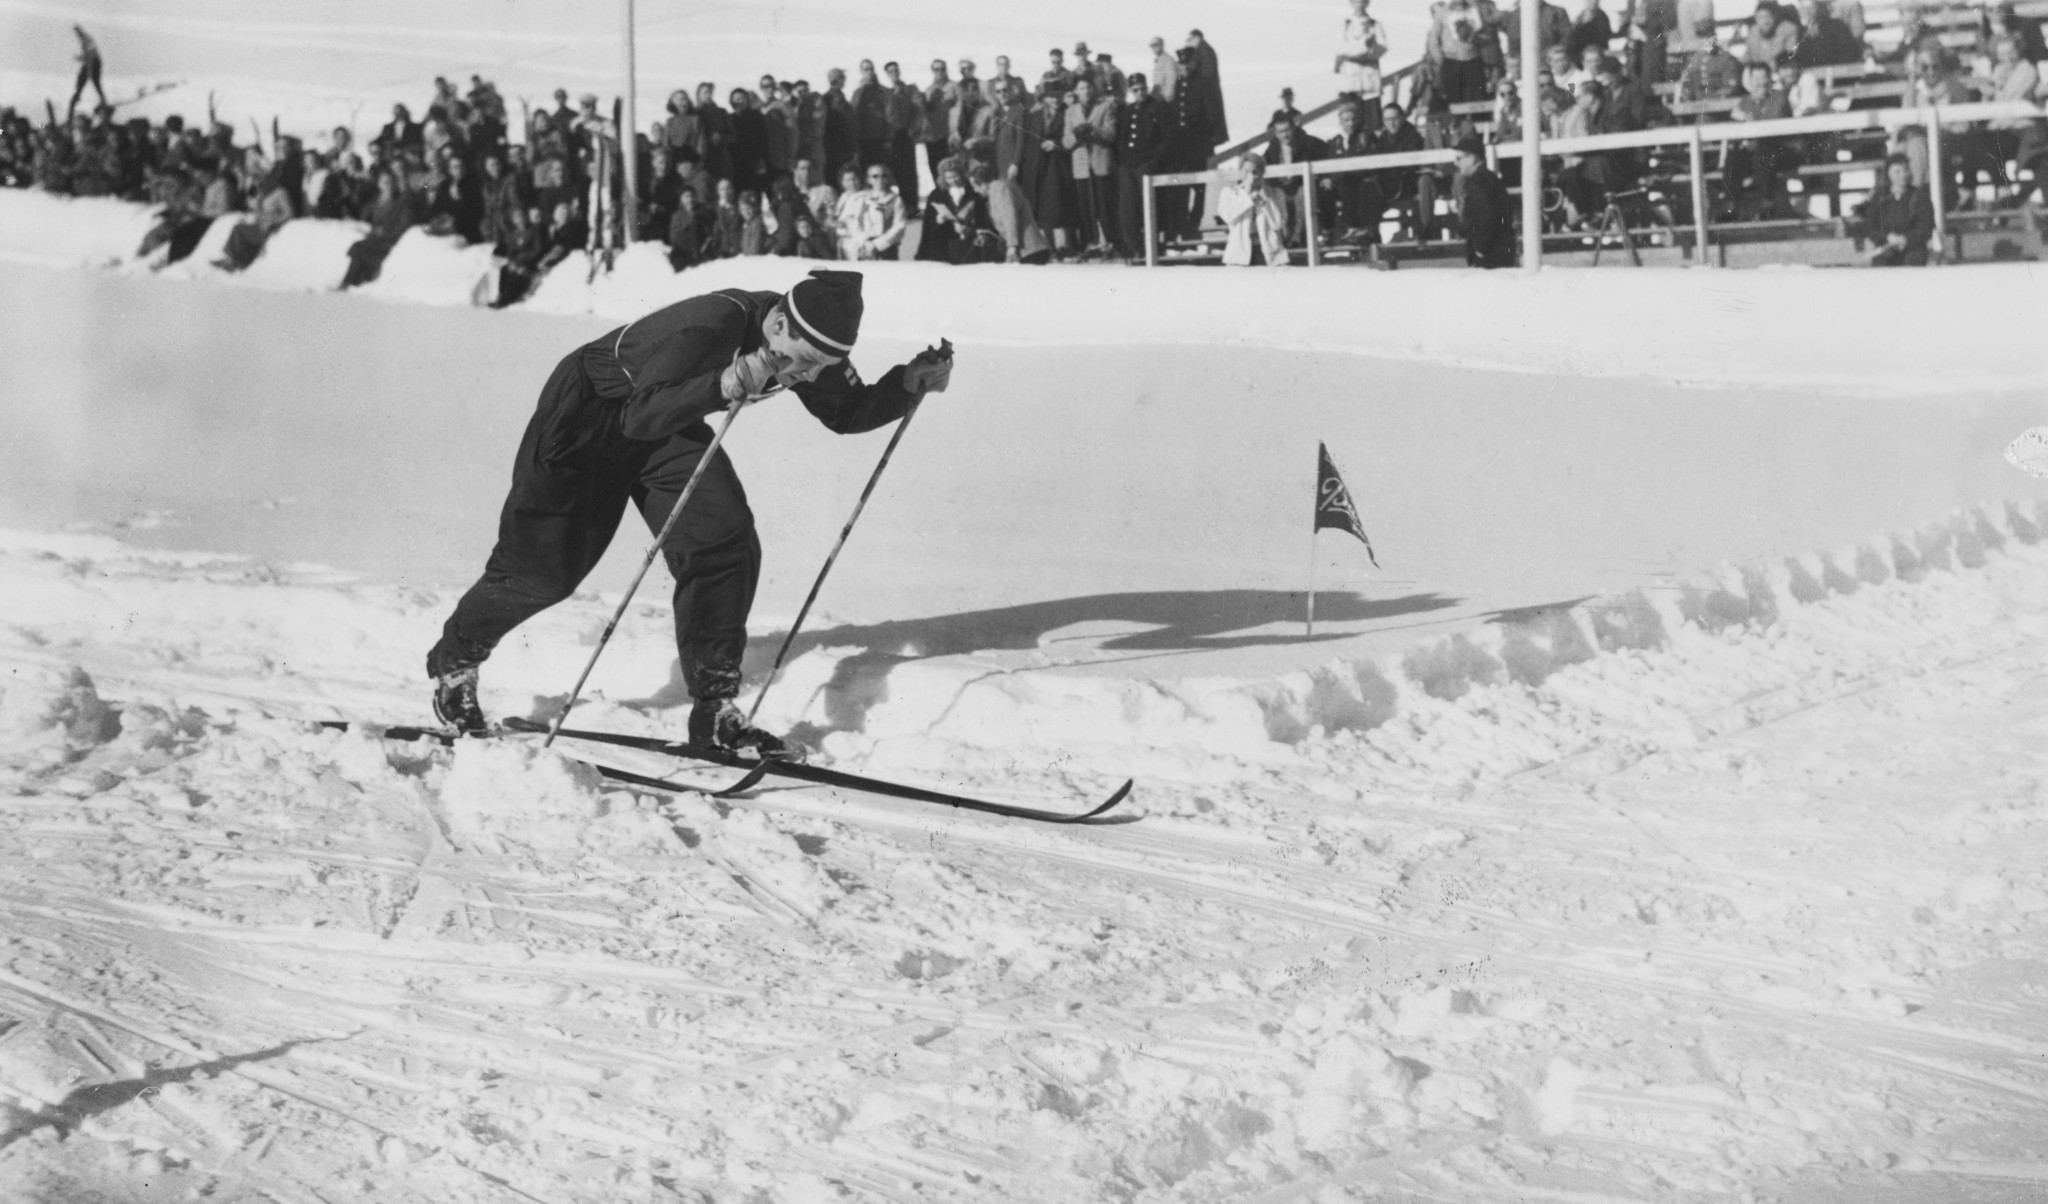 Switzerland last staged the Winter Olympics in 1948 when St Moritz played host ©Getty Images